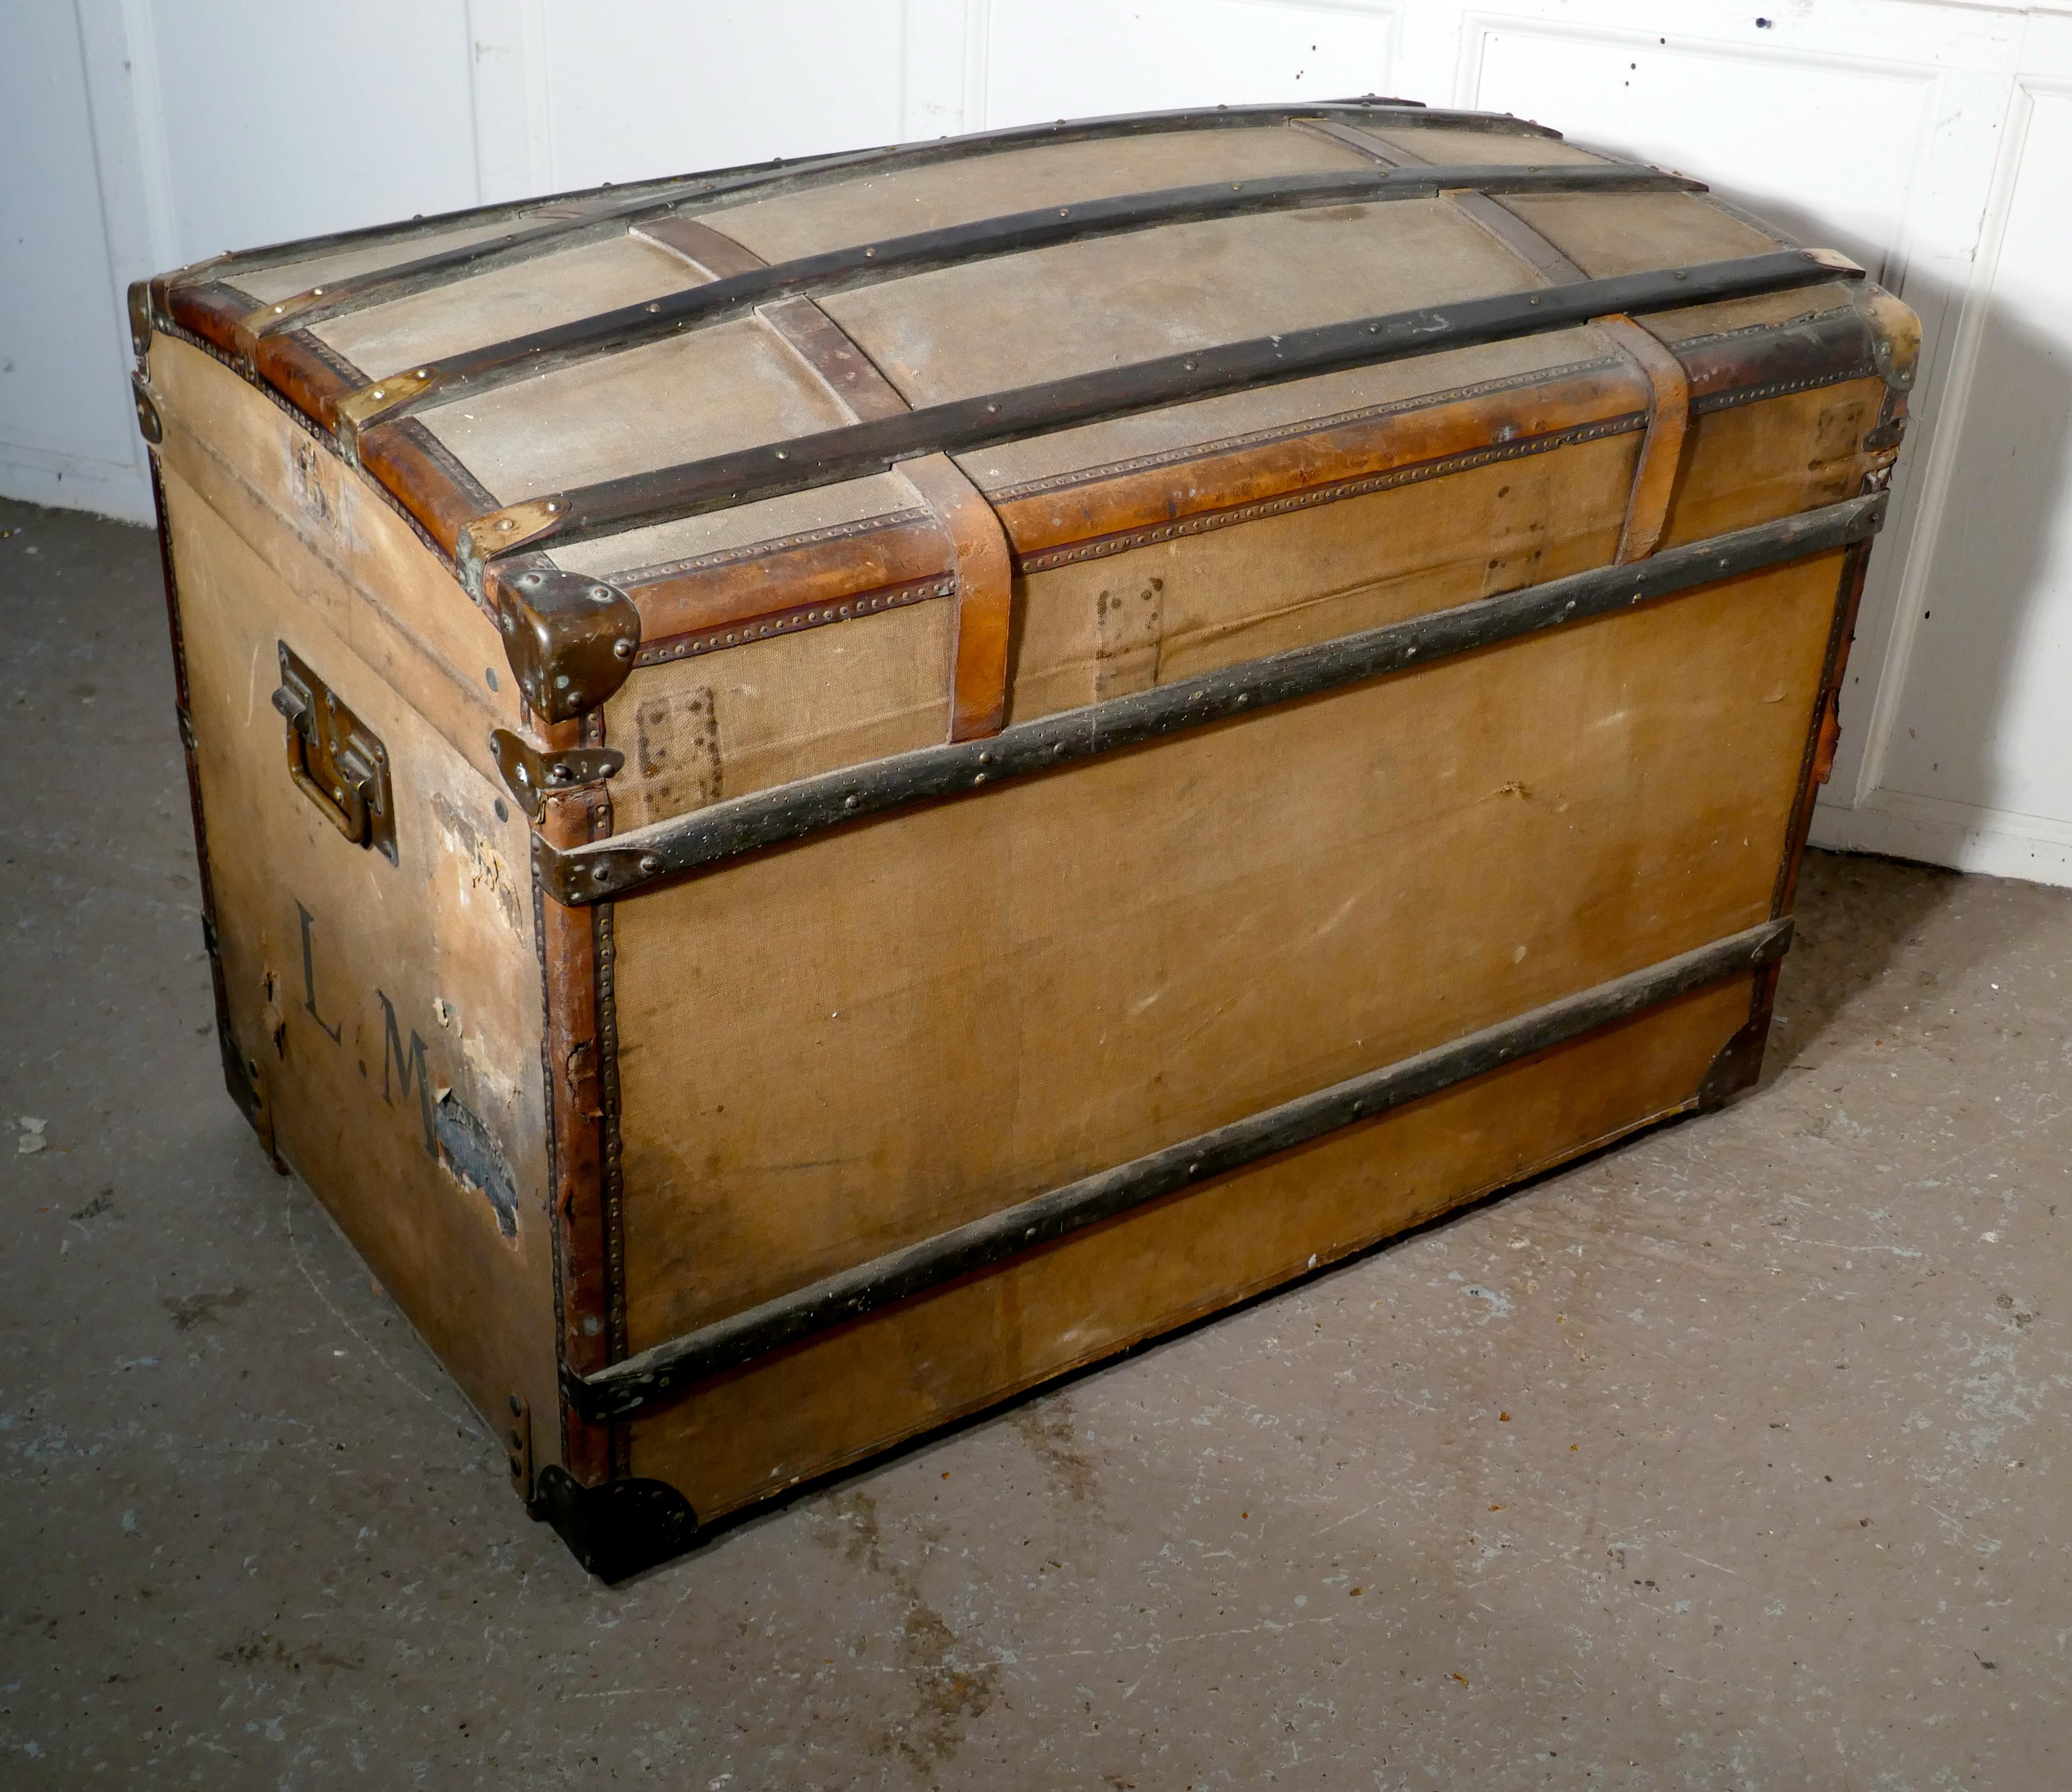 A large 19th century French canvas dome top travel trunk, lion brand

The trunk has a wooden carcass covered in canvas, it has wood and Leather banding with decorative brass metal work around all the edges. The trunk has brass carrying handles and